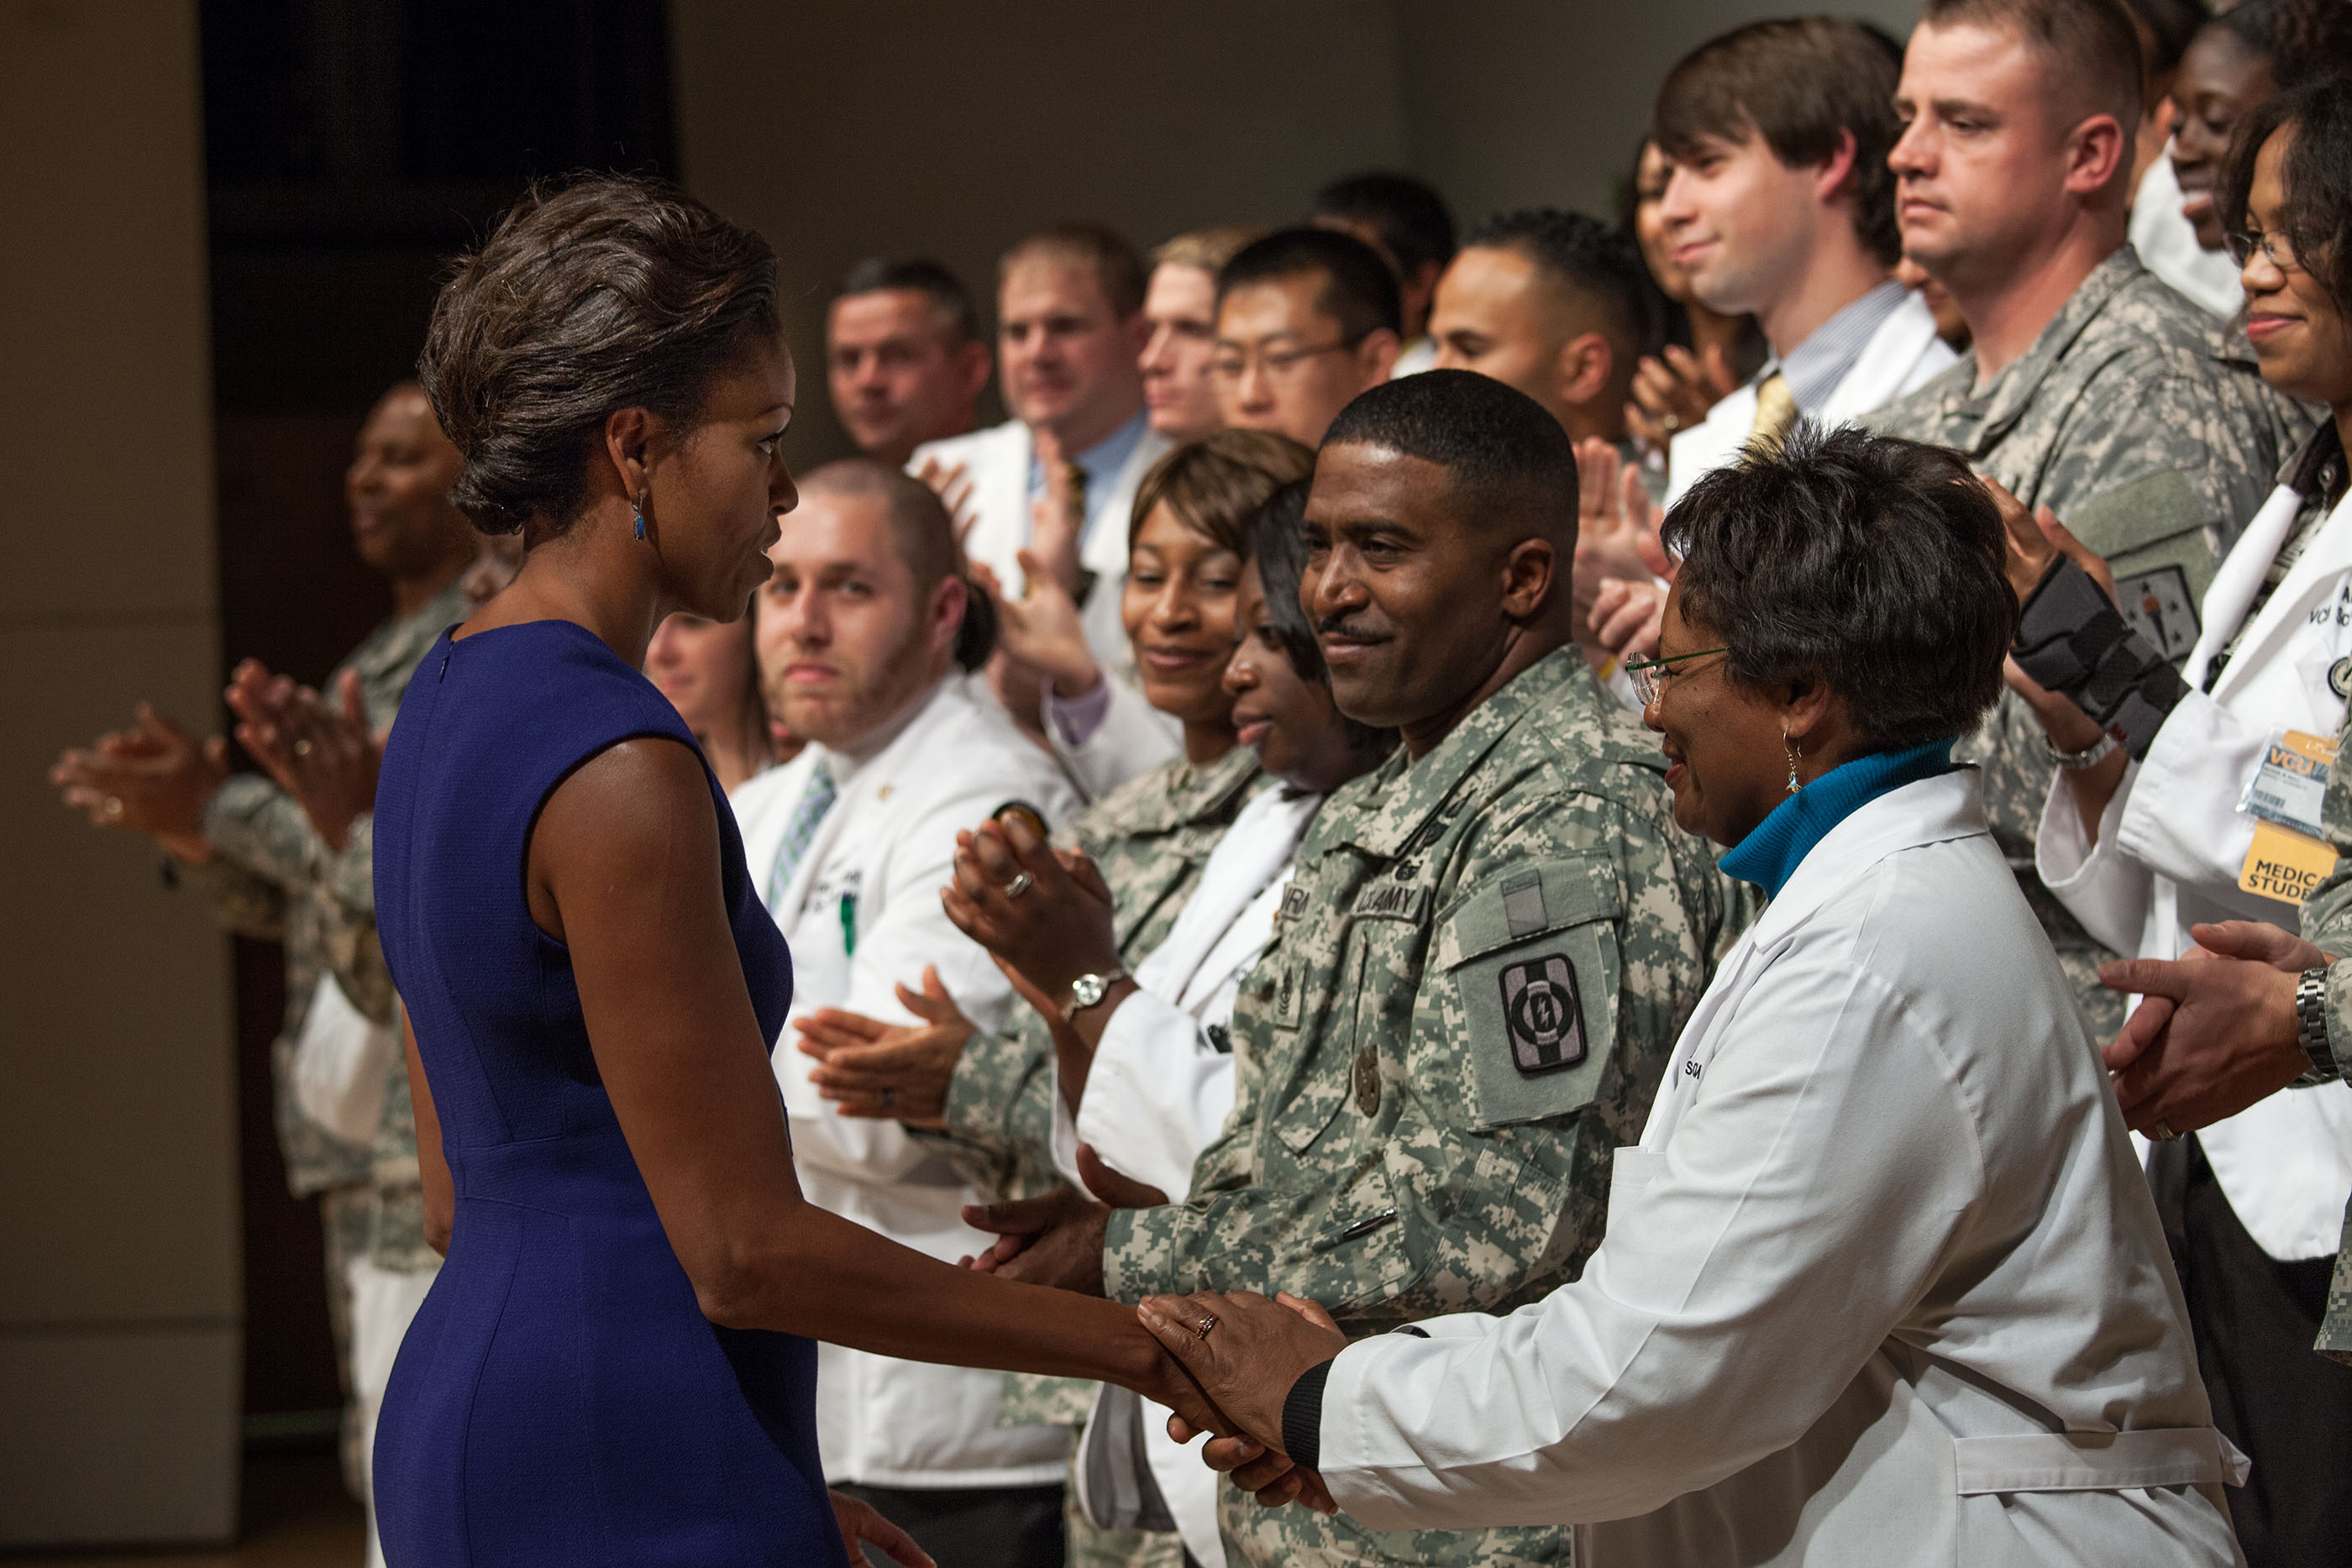 The First Lady shakes hands with veterans and medical personnel at Virginia Commonwealth University AAMC-Medical Center in Richmond, Jan. 11, 2012. (Official White House Photo by Chuck Kennedy)